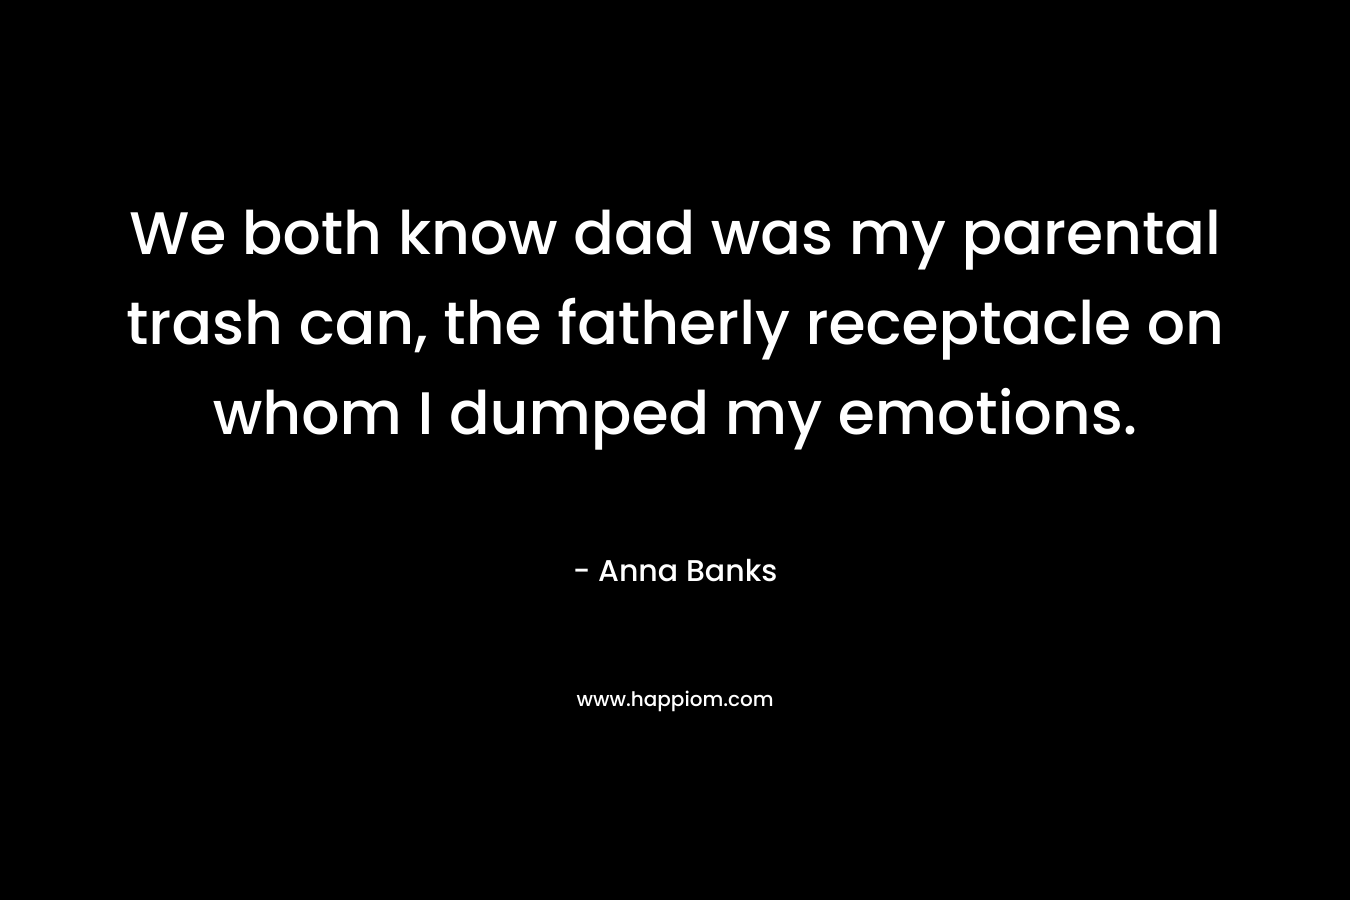 We both know dad was my parental trash can, the fatherly receptacle on whom I dumped my emotions. – Anna Banks